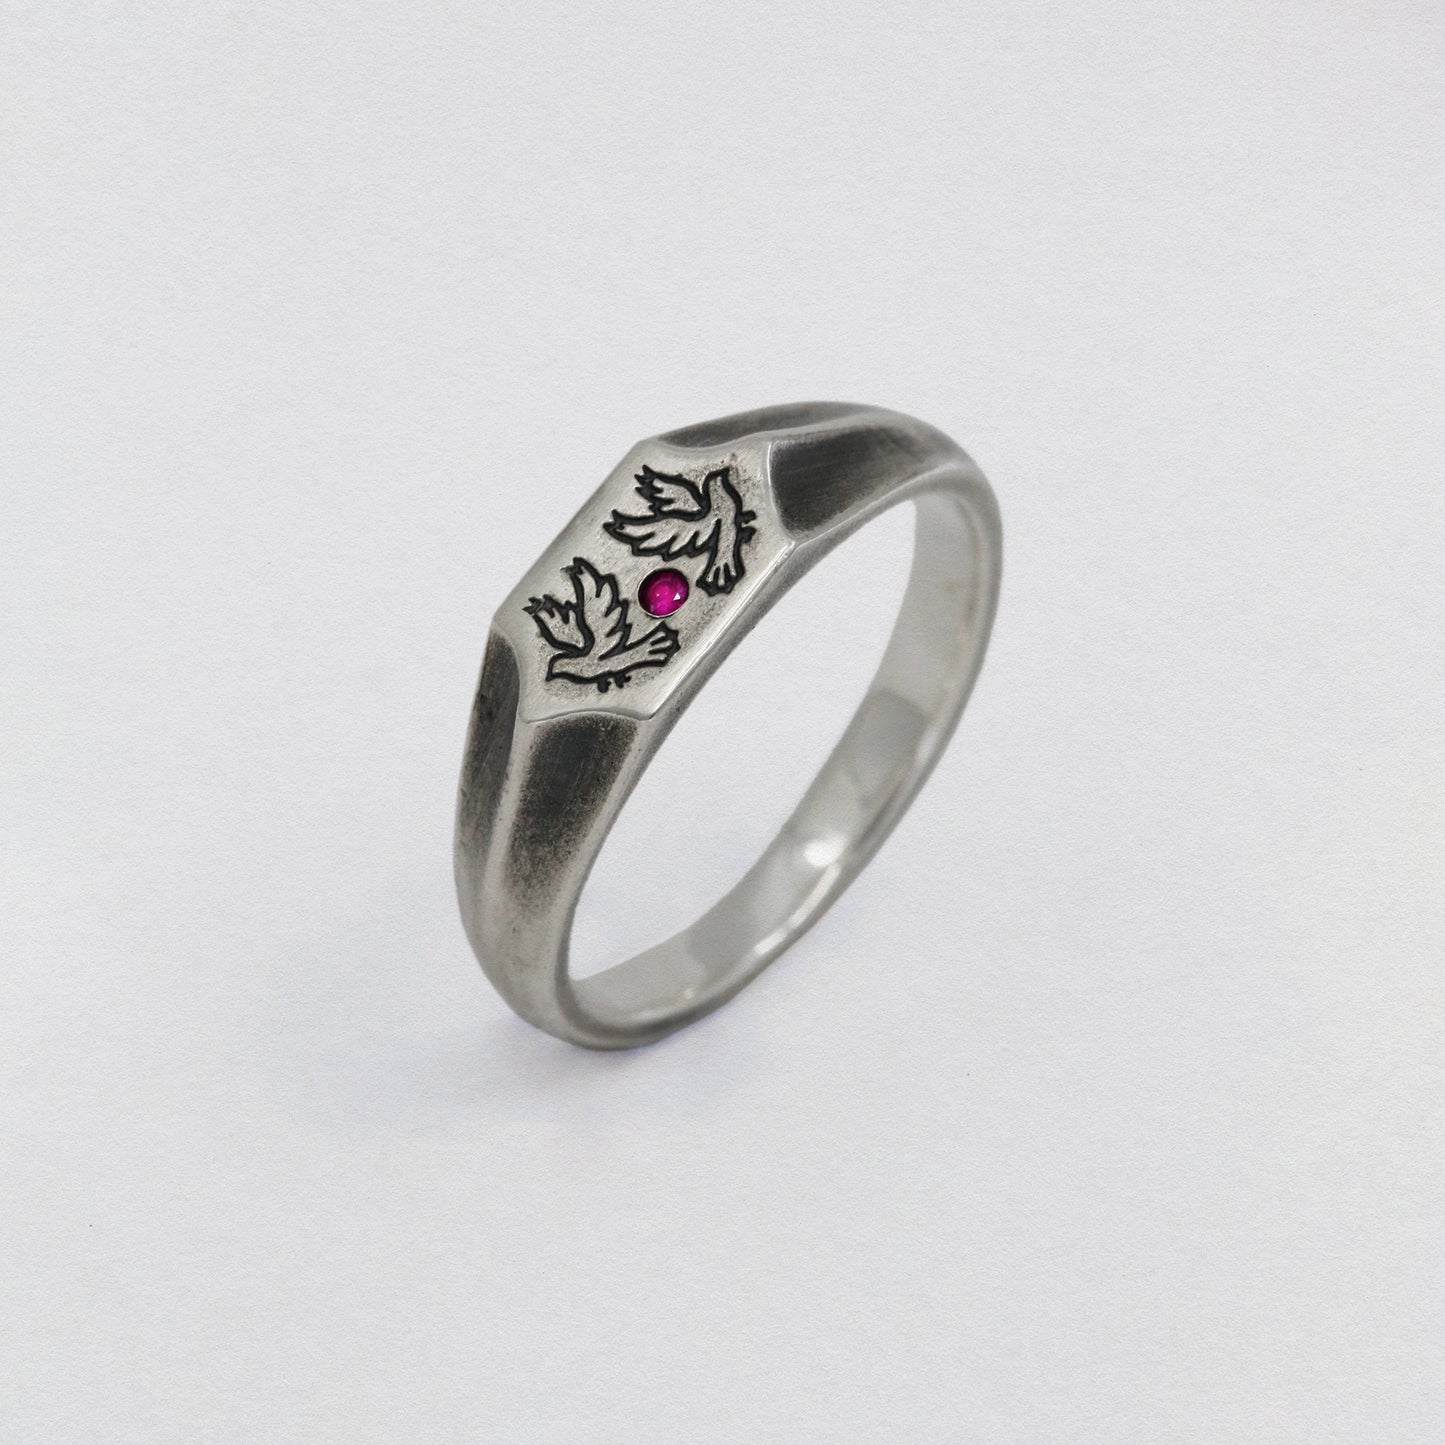 2 Birds and a ruby stone on a 925 silver signet ring